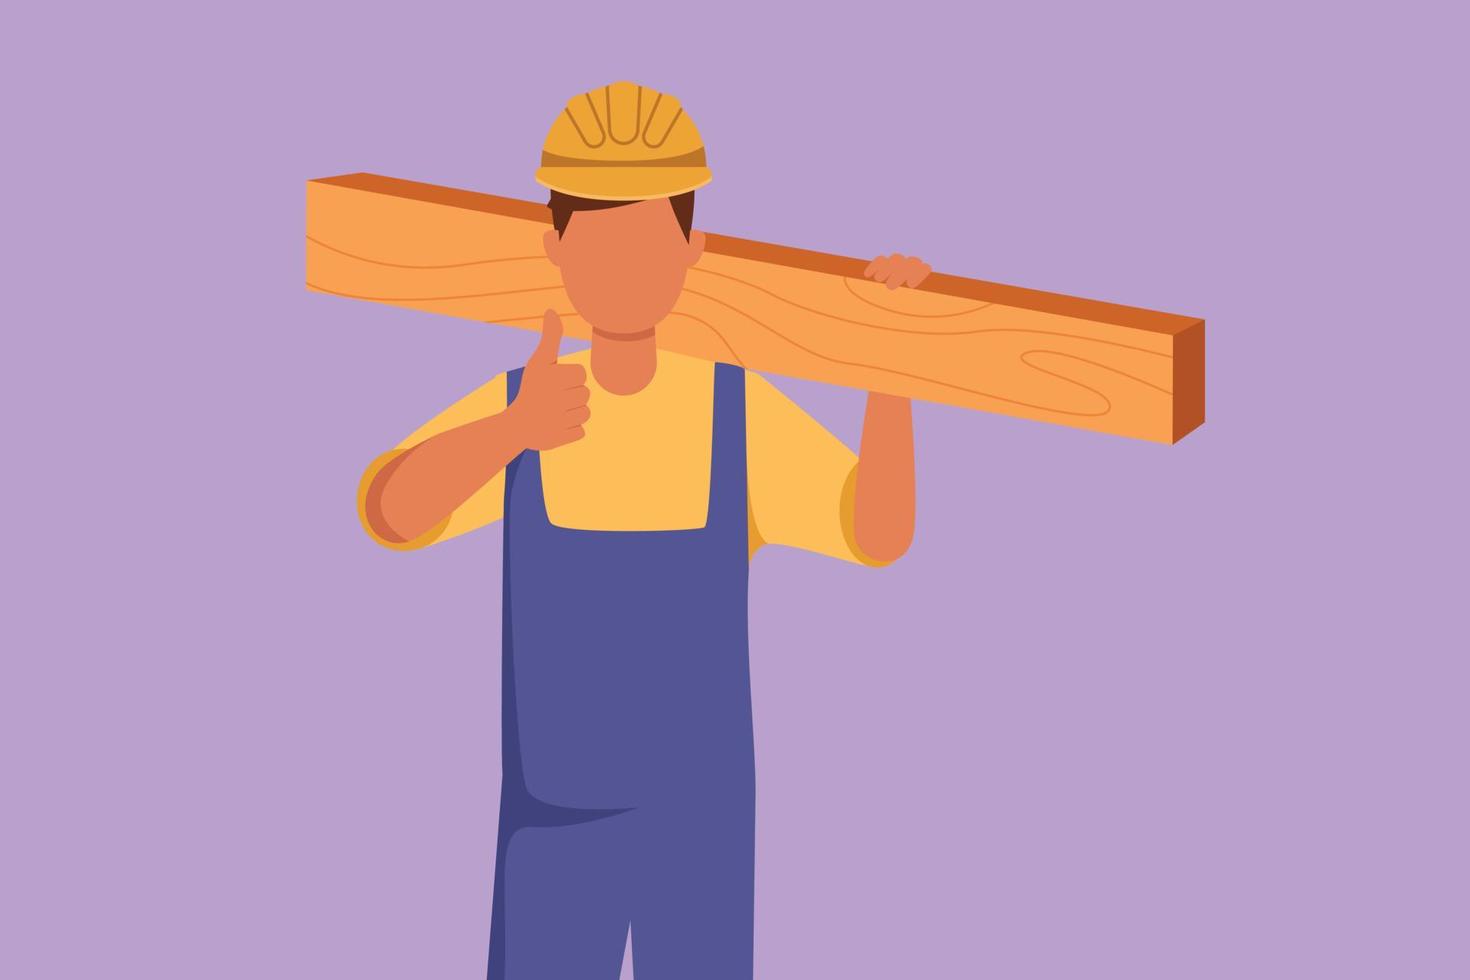 Cartoon flat style drawing carpenter carrying wooden board with thumbs up gesture and working in his workshop making wooden products. Skills in using carpentry tool. Graphic design vector illustration